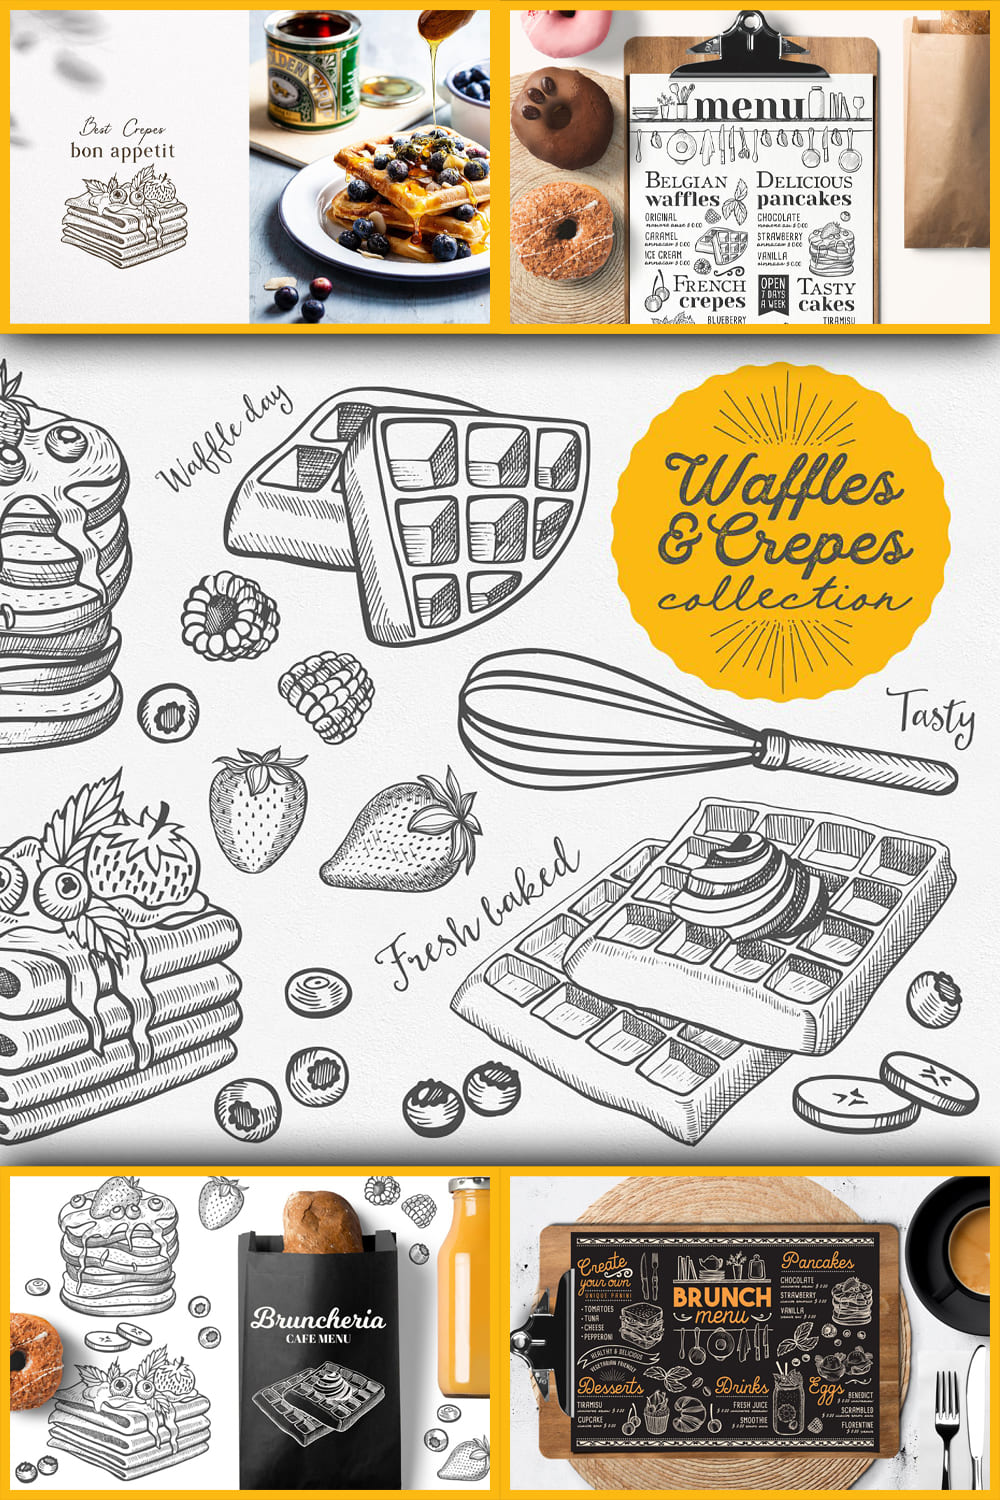 2217694 waffles crepes hand drawn graphic pinterest 1000 1500 207